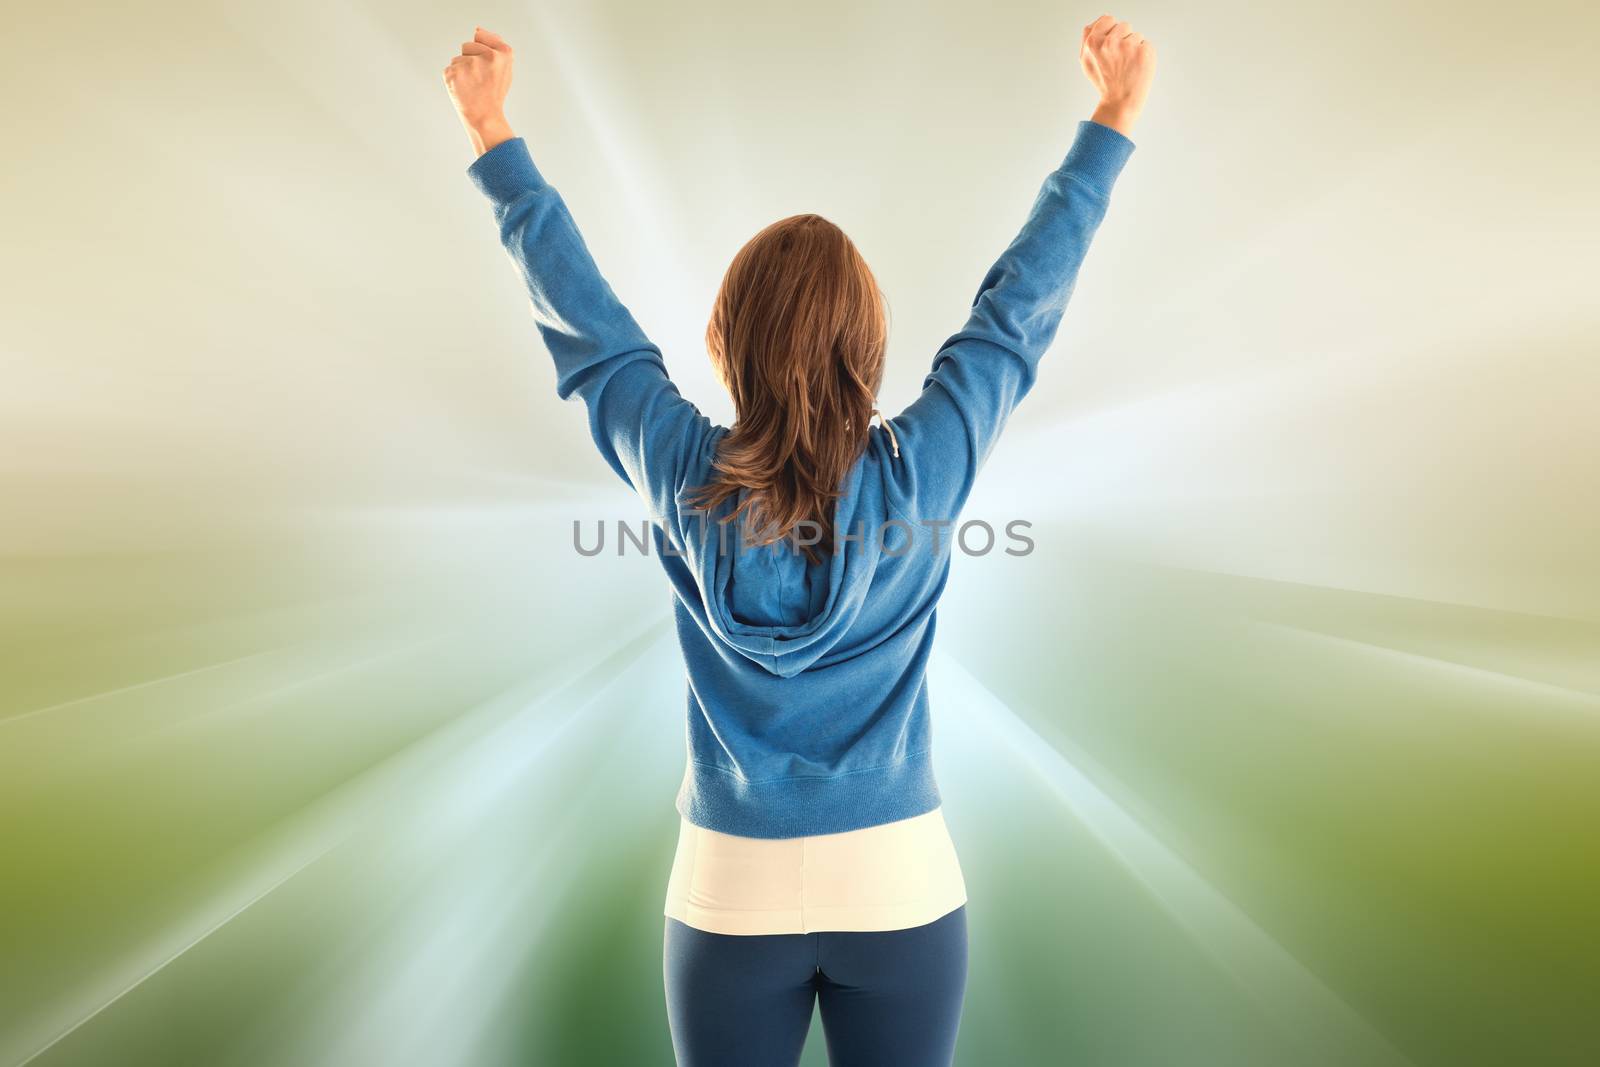 Cheering fit woman against abstract background